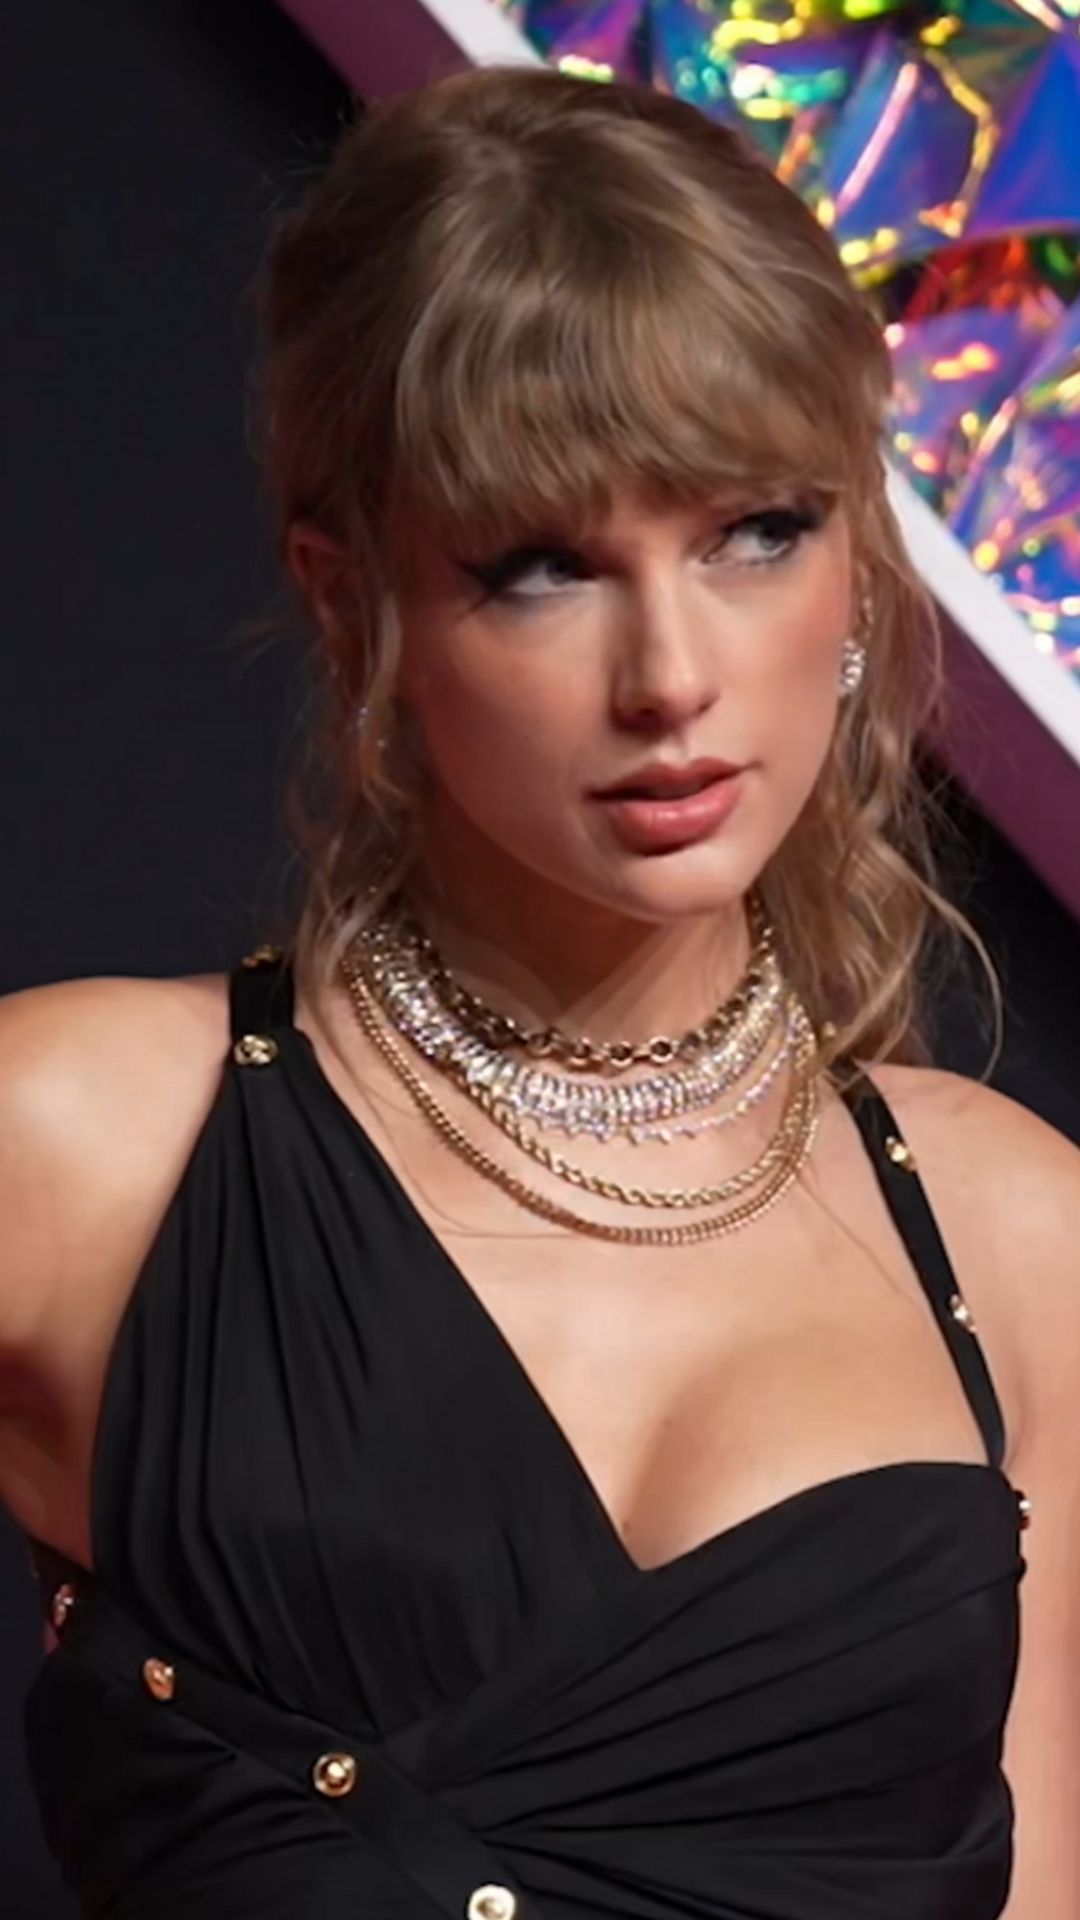 Taylor Swift Deepfake Alarm: White House and Microsoft Call for Action